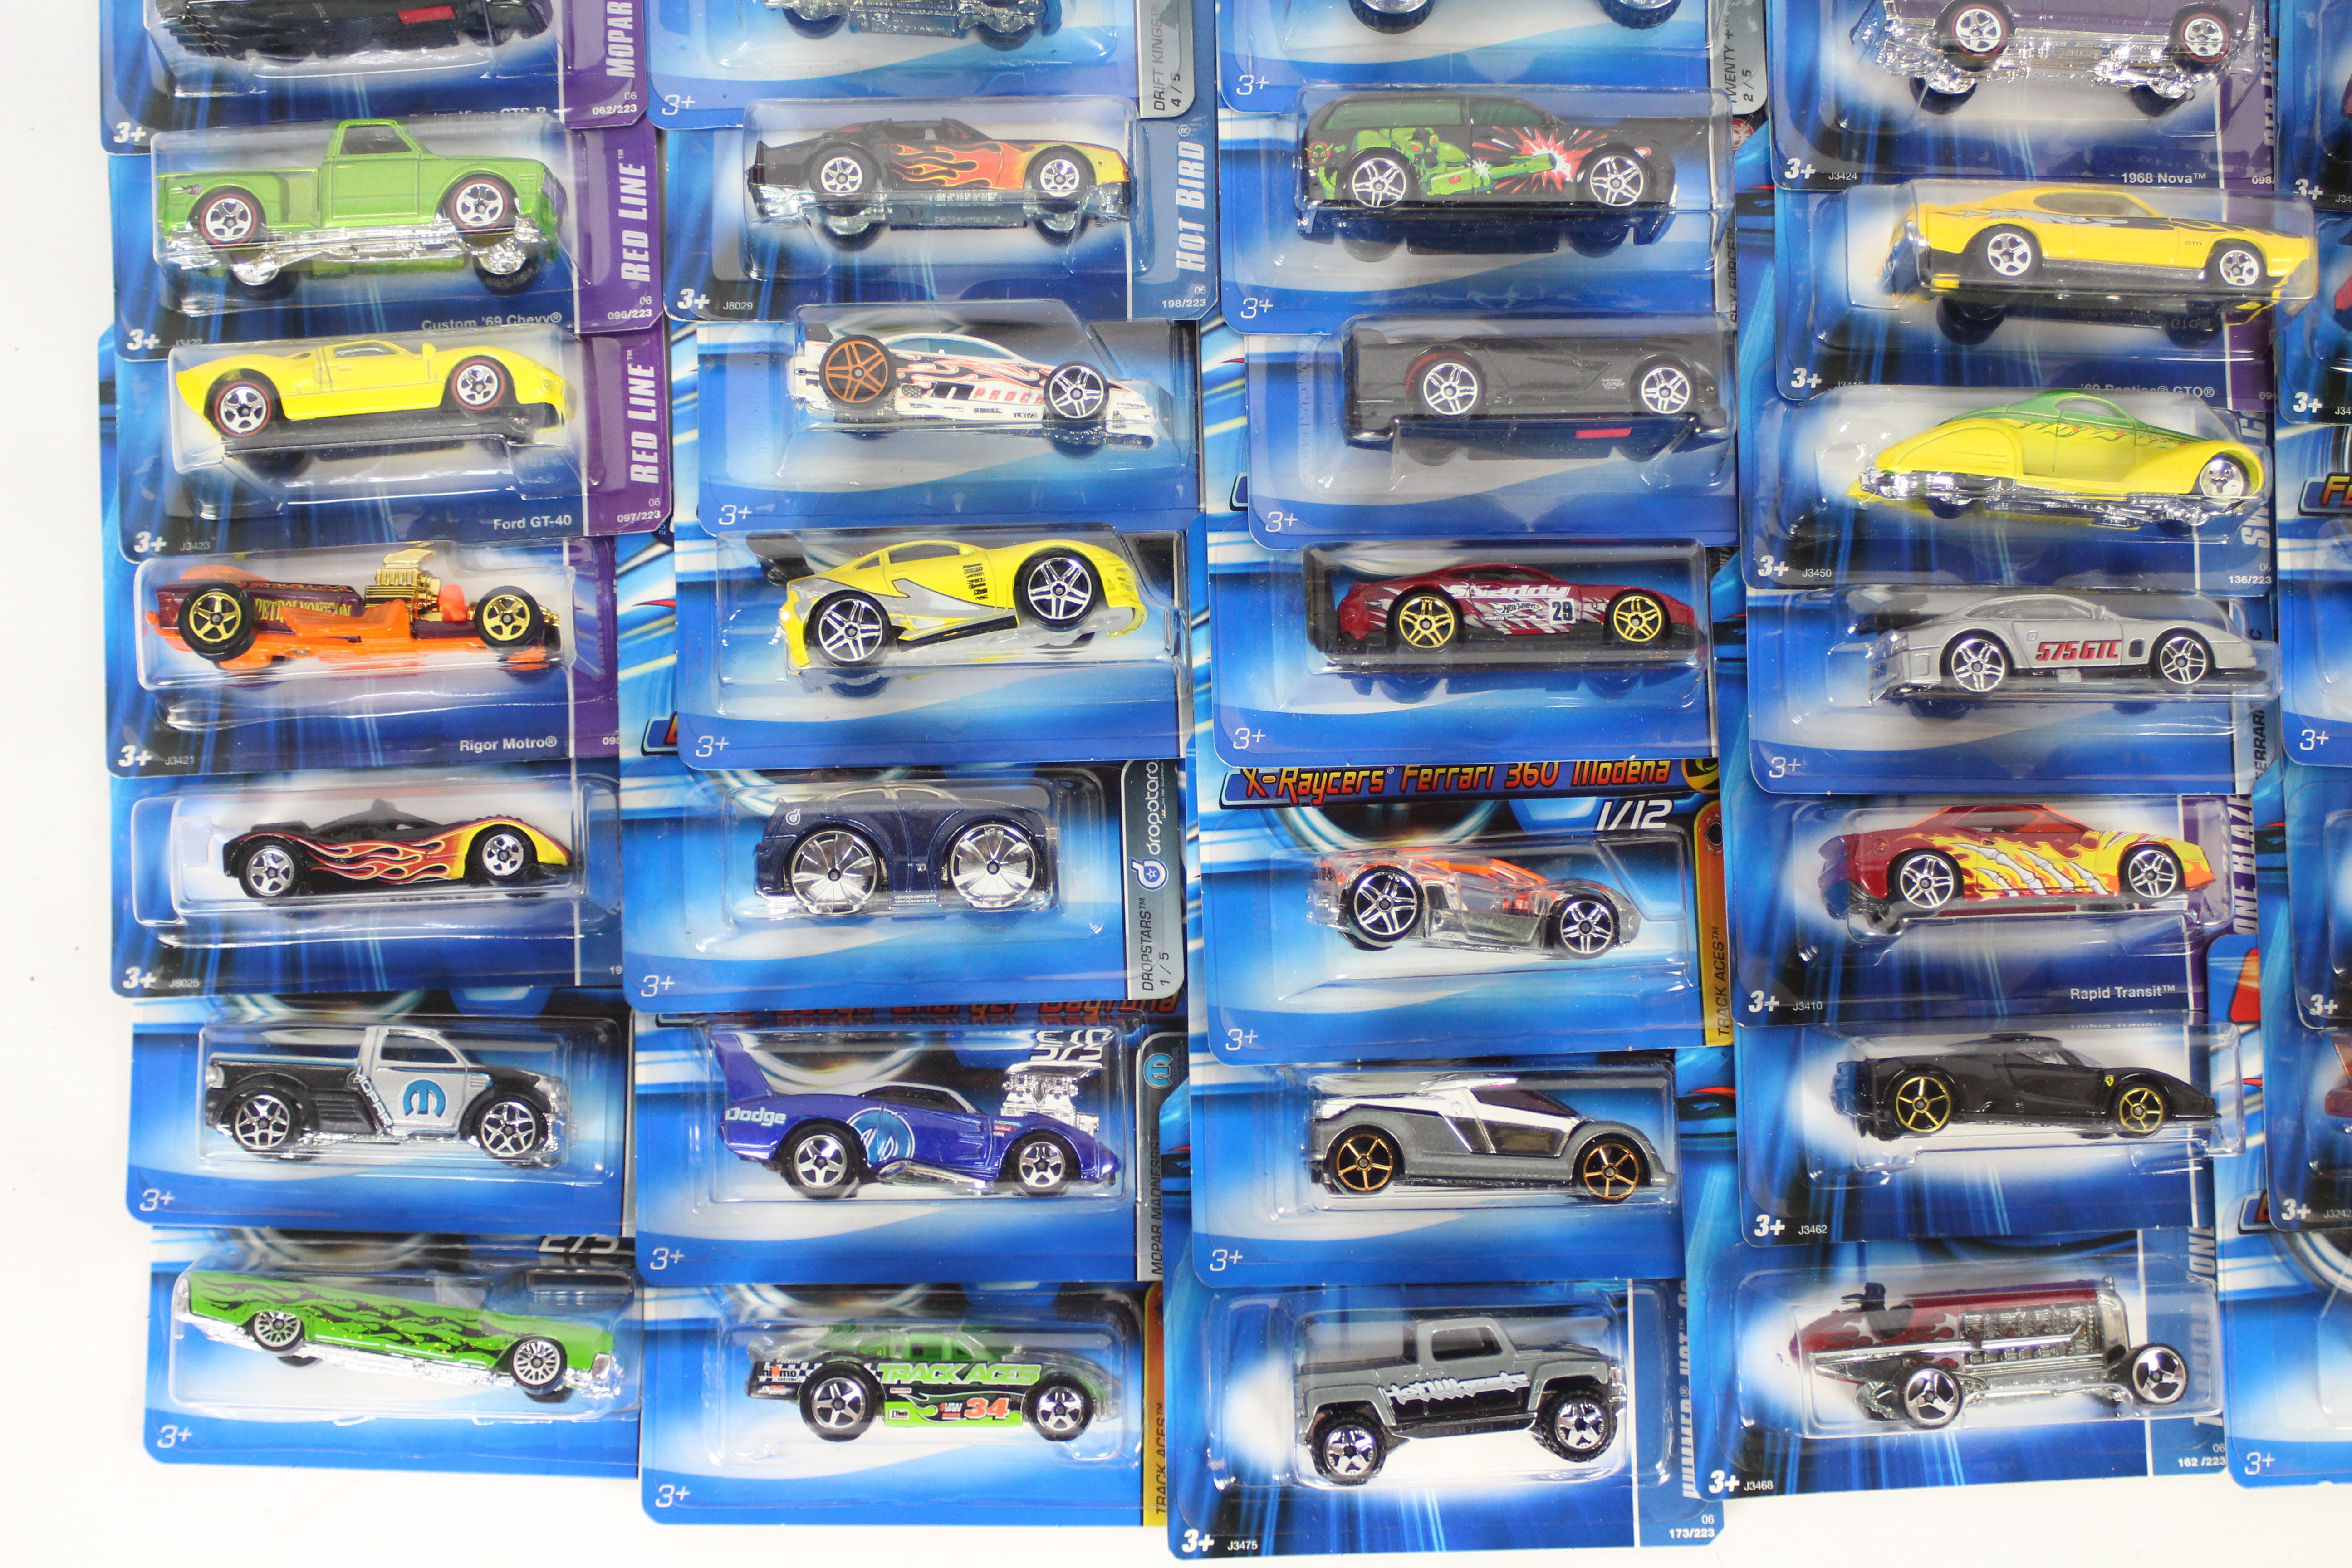 Hot Wheels - 50 x unopened carded vehicles from 2006/7 including Ford GT-40 # J3423, - Image 2 of 4